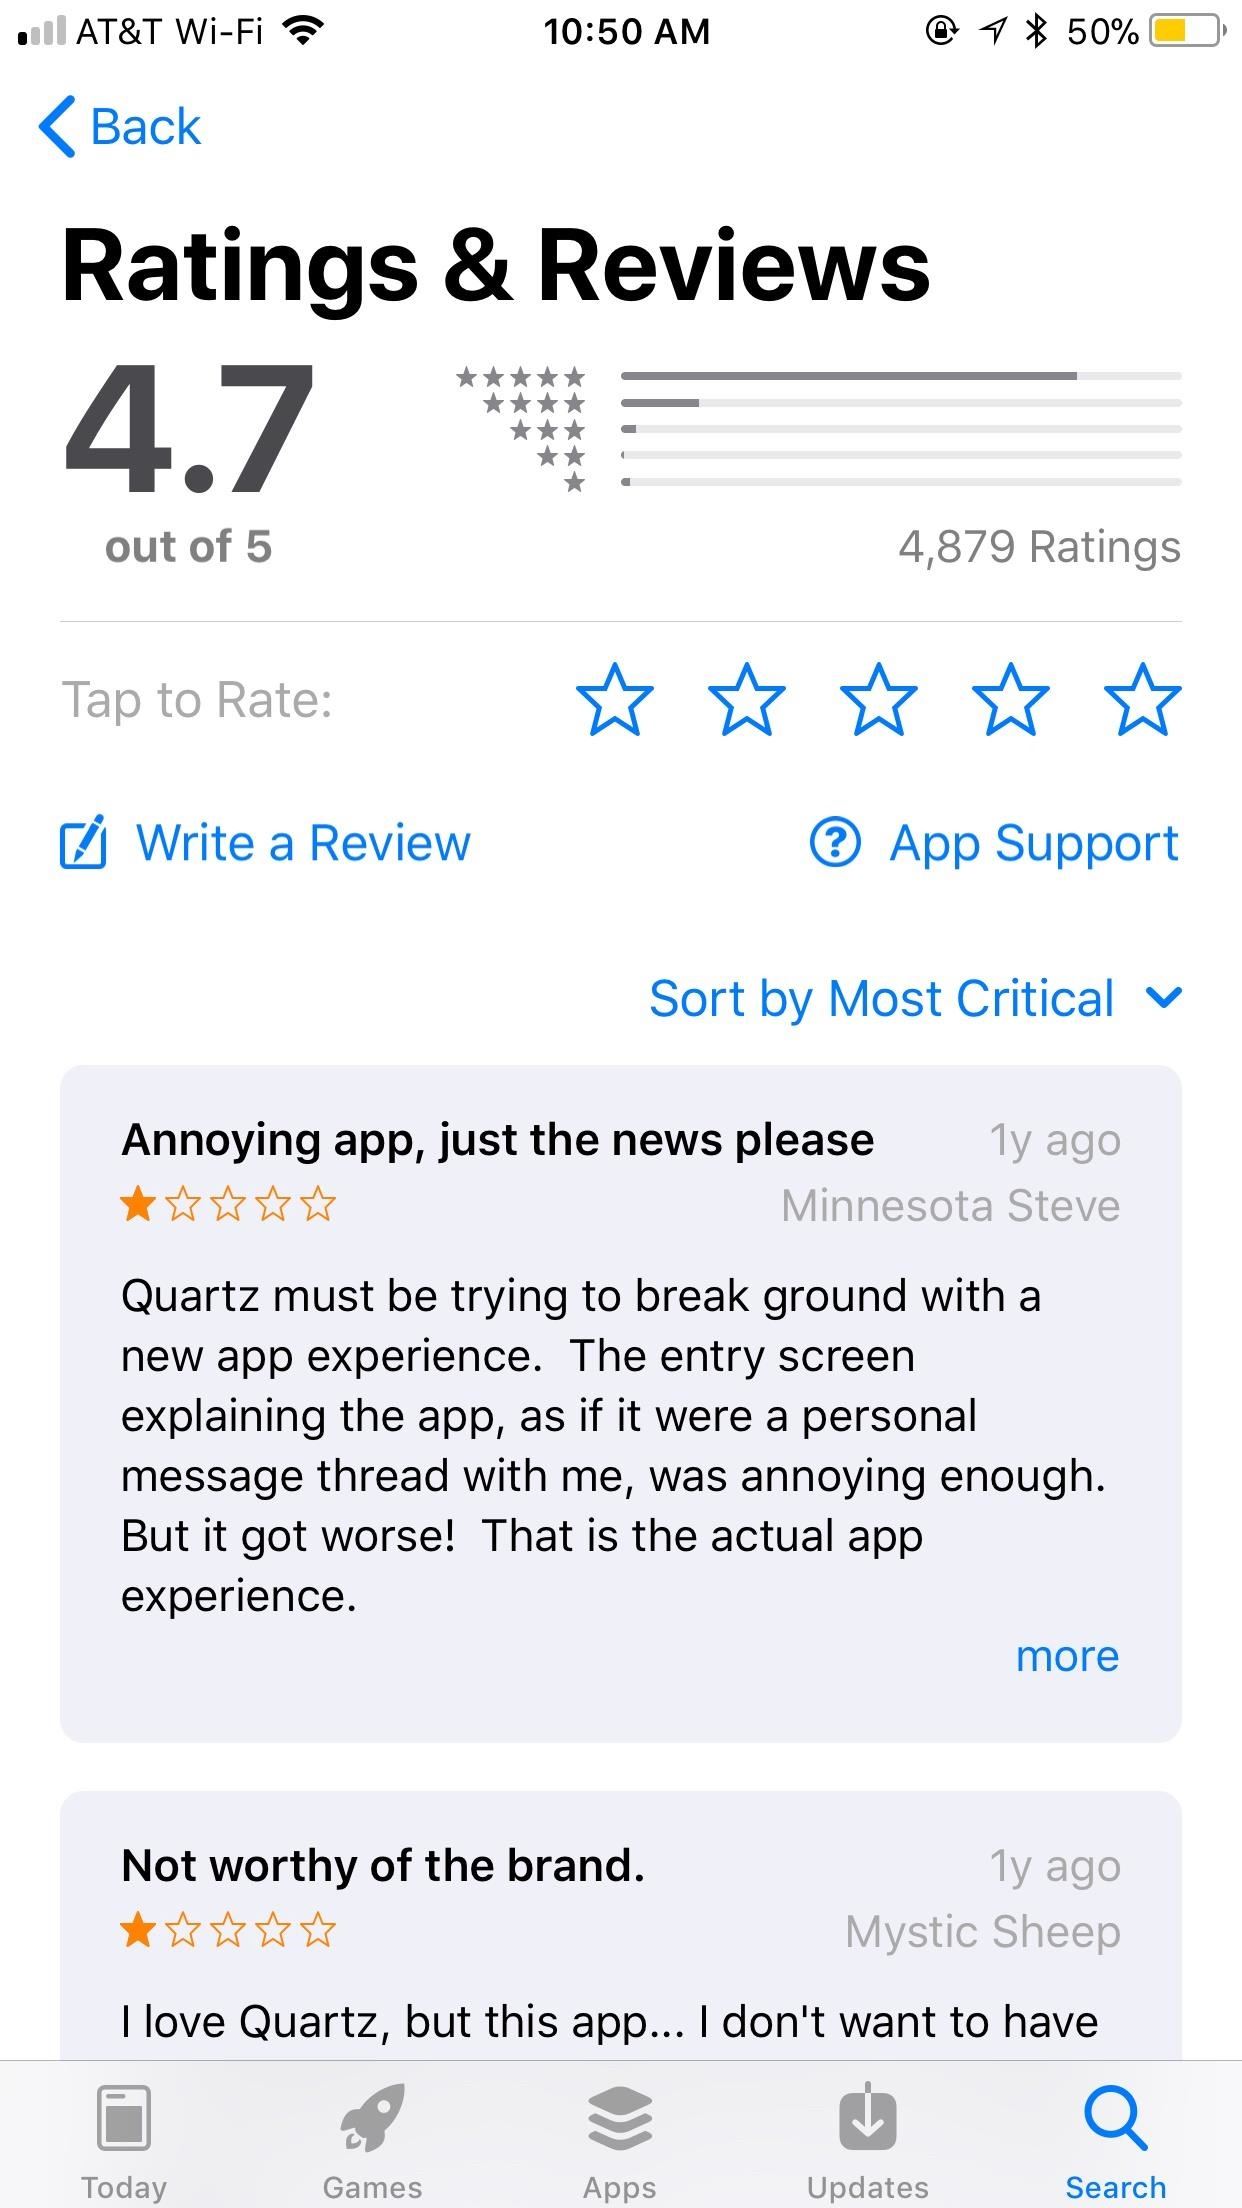 How to Sort App Store Reviews on Your iPhone in iOS 11.3 « iOS ...